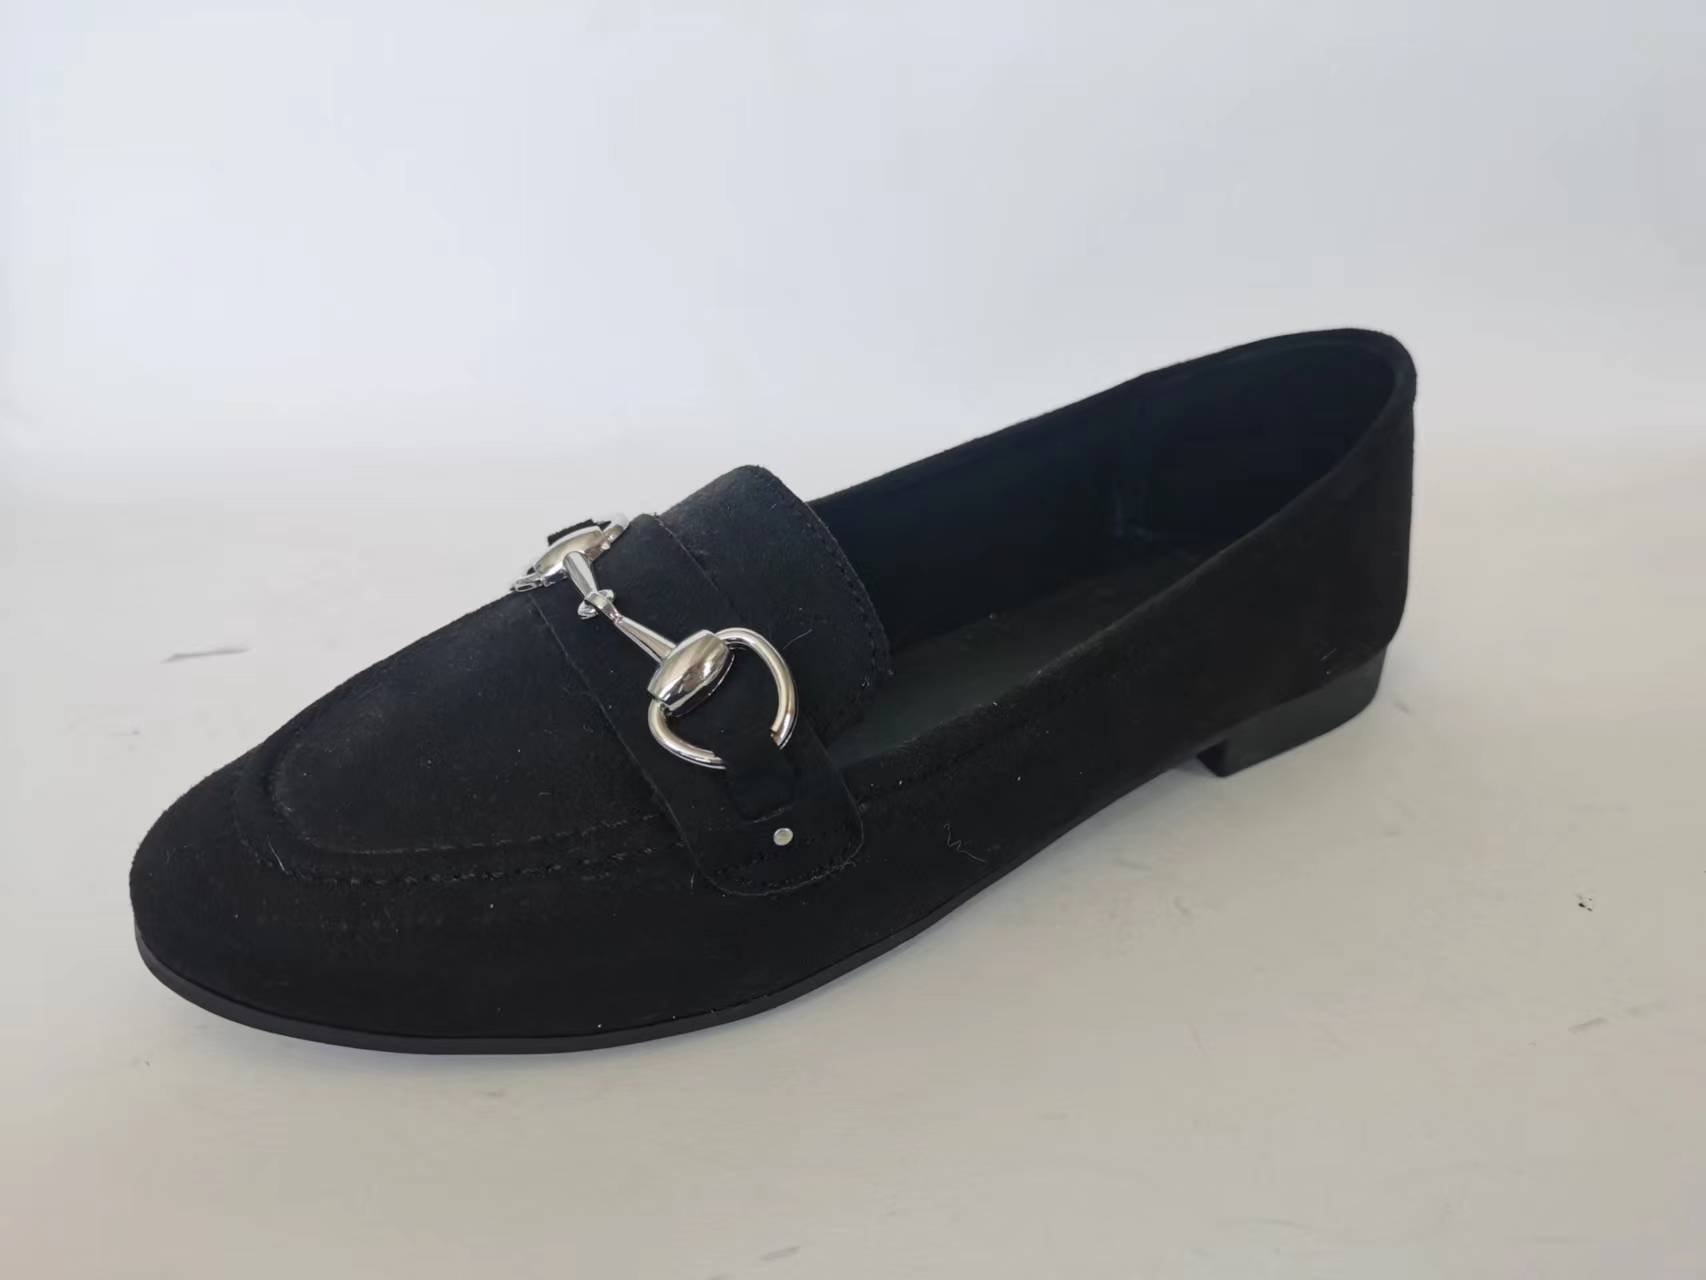 Women's Girls' Flats Slip On Loafers Casual Shoes